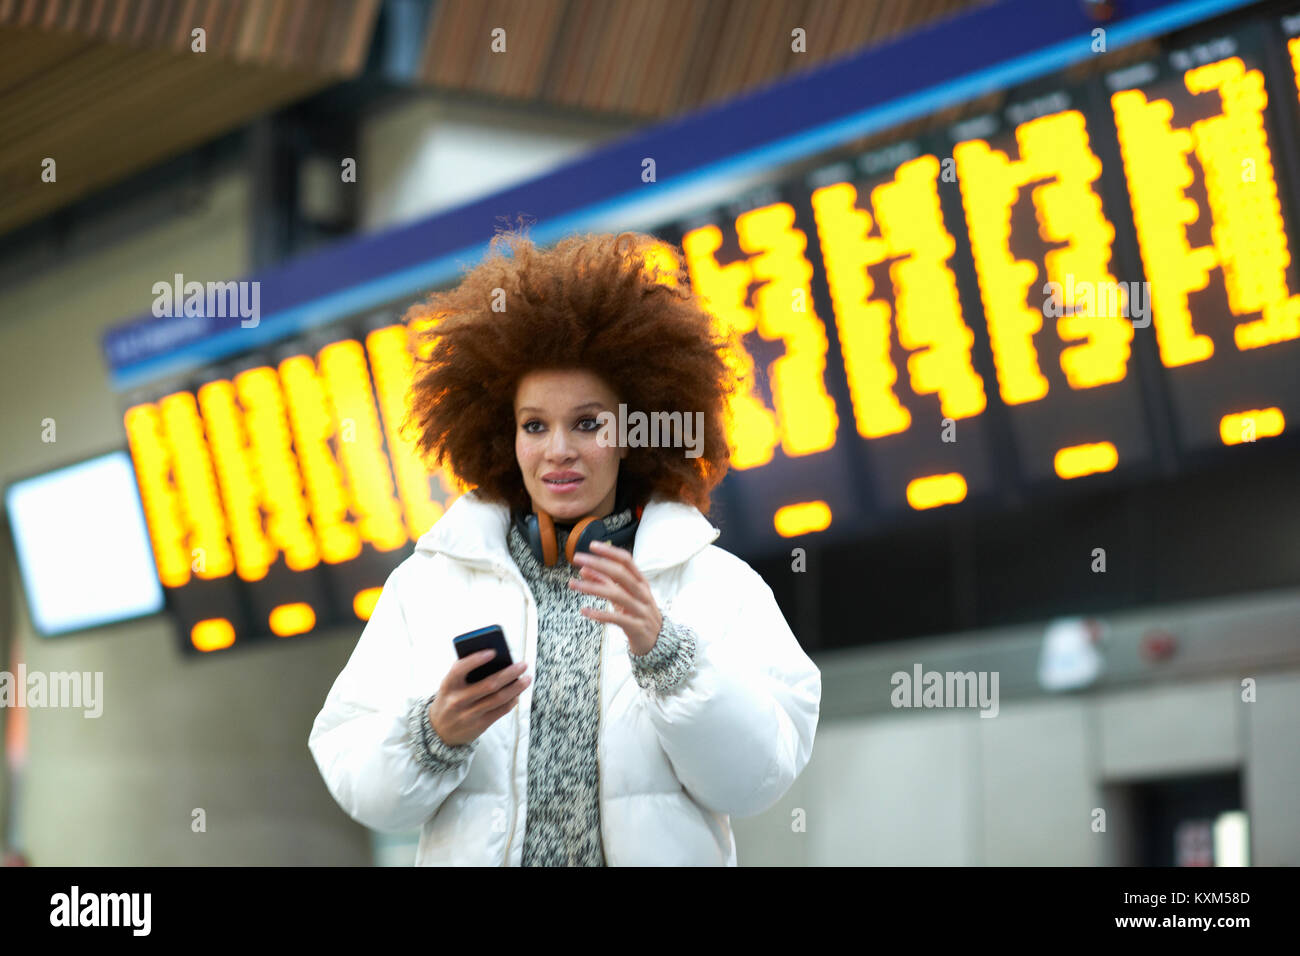 Young woman at train station,holding smartphone Stock Photo